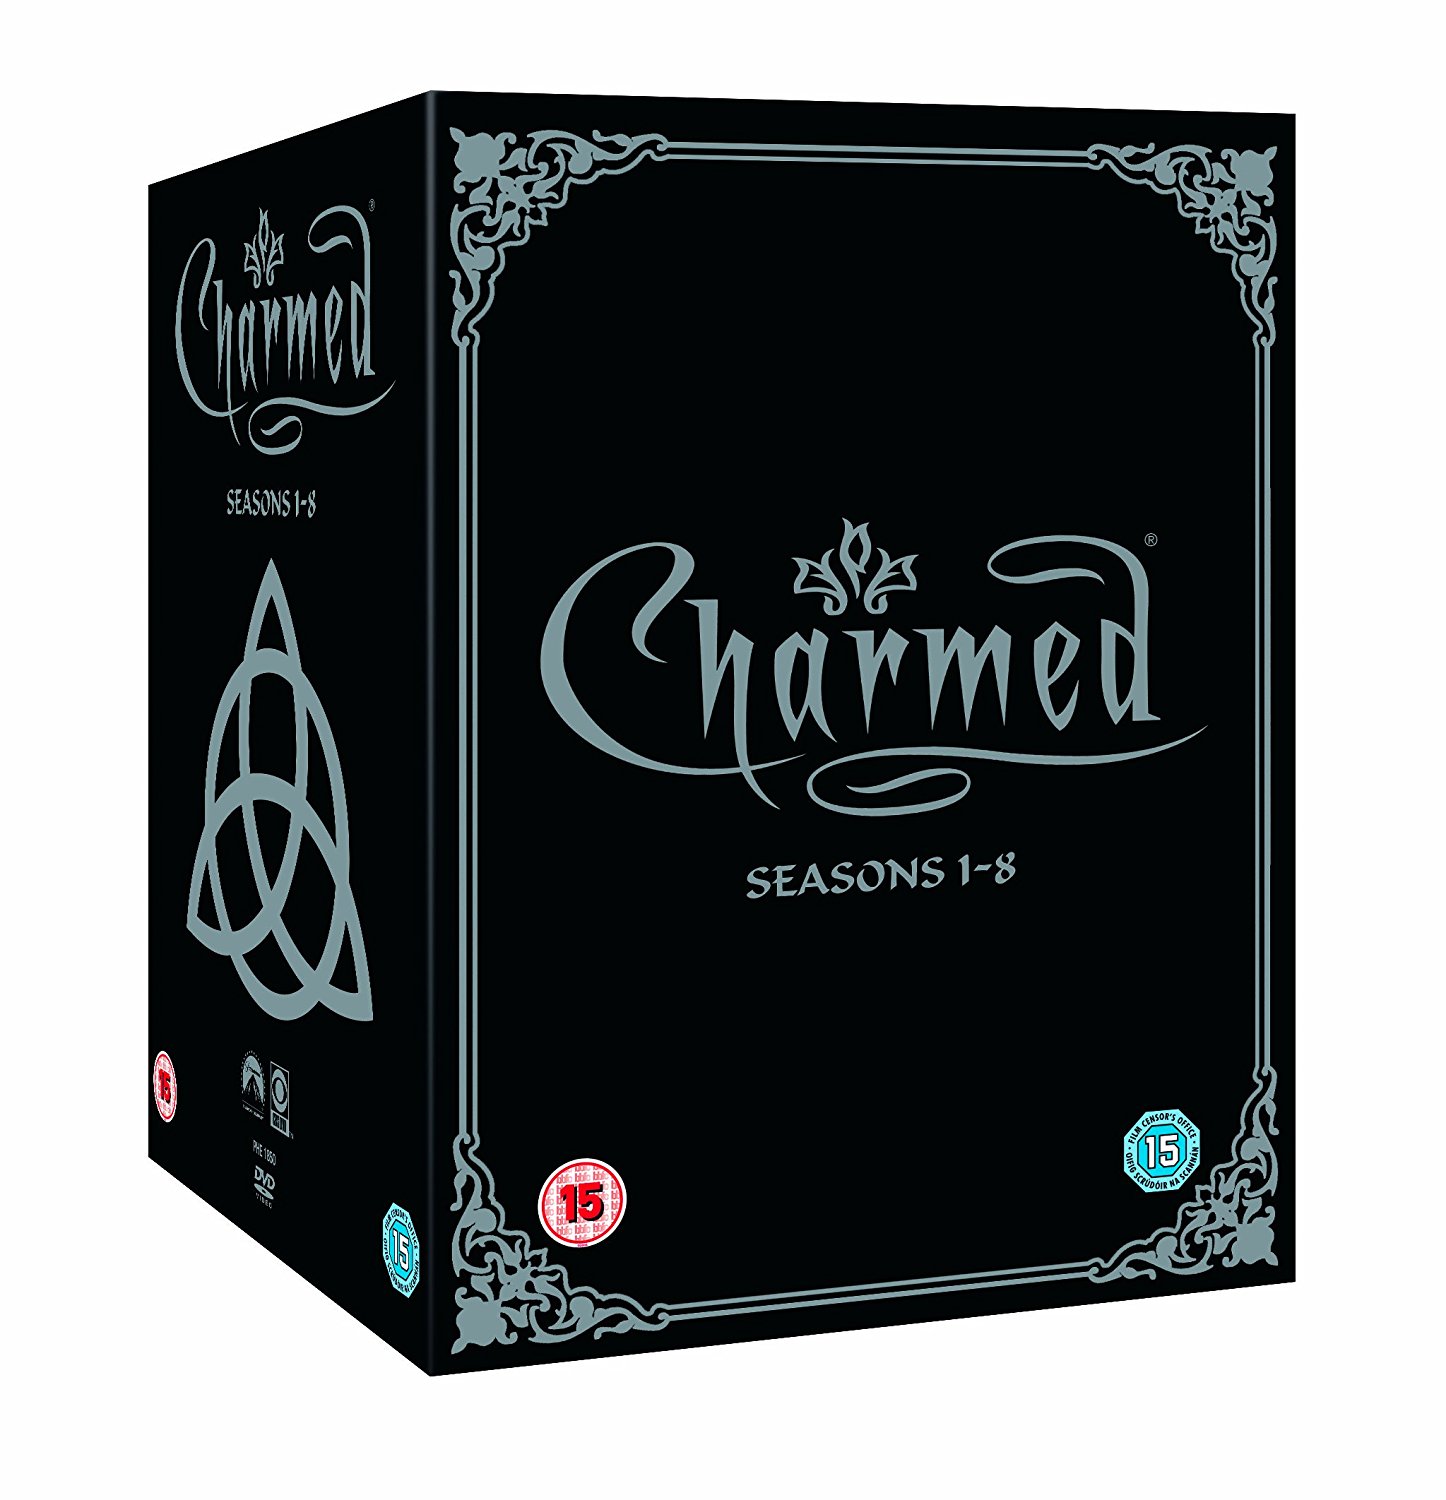 Charmed - Complete Seasons 1-8 [DVD]: Amazon.co.uk: Holly Marie ...